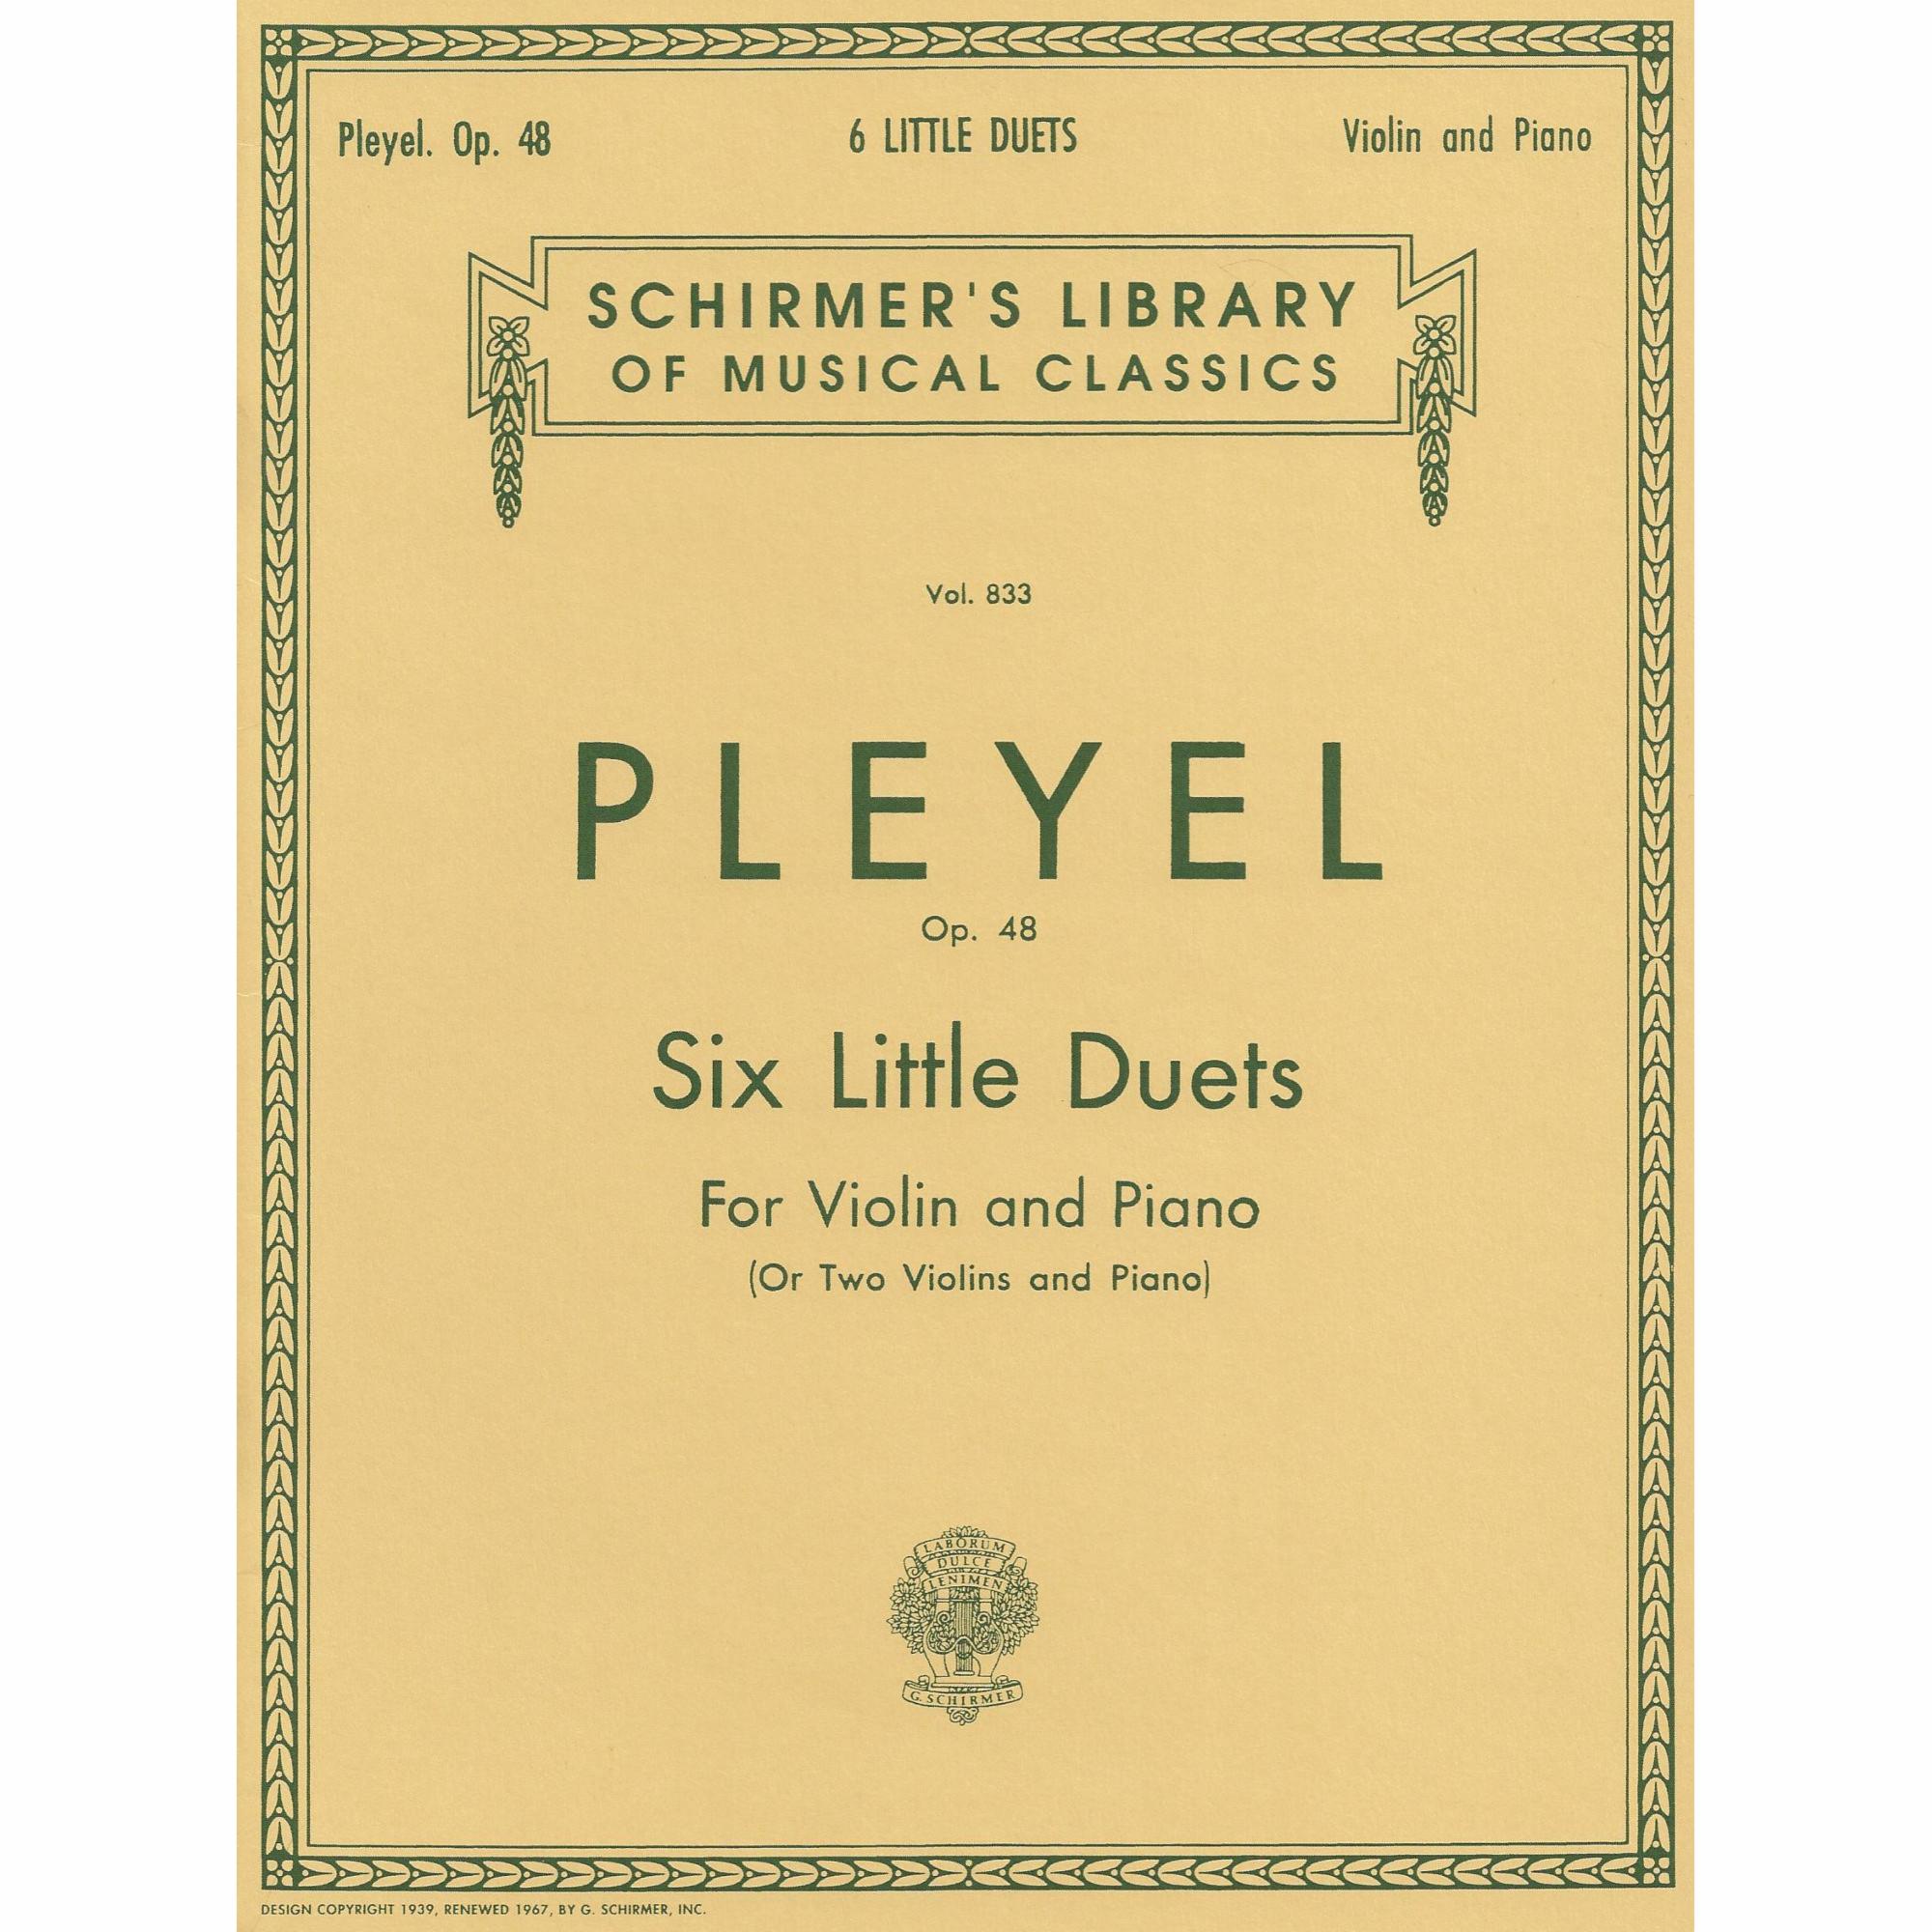 Pleyel -- Six Little Duets, Op. 48 for Violin (or Two Violins) and Piano